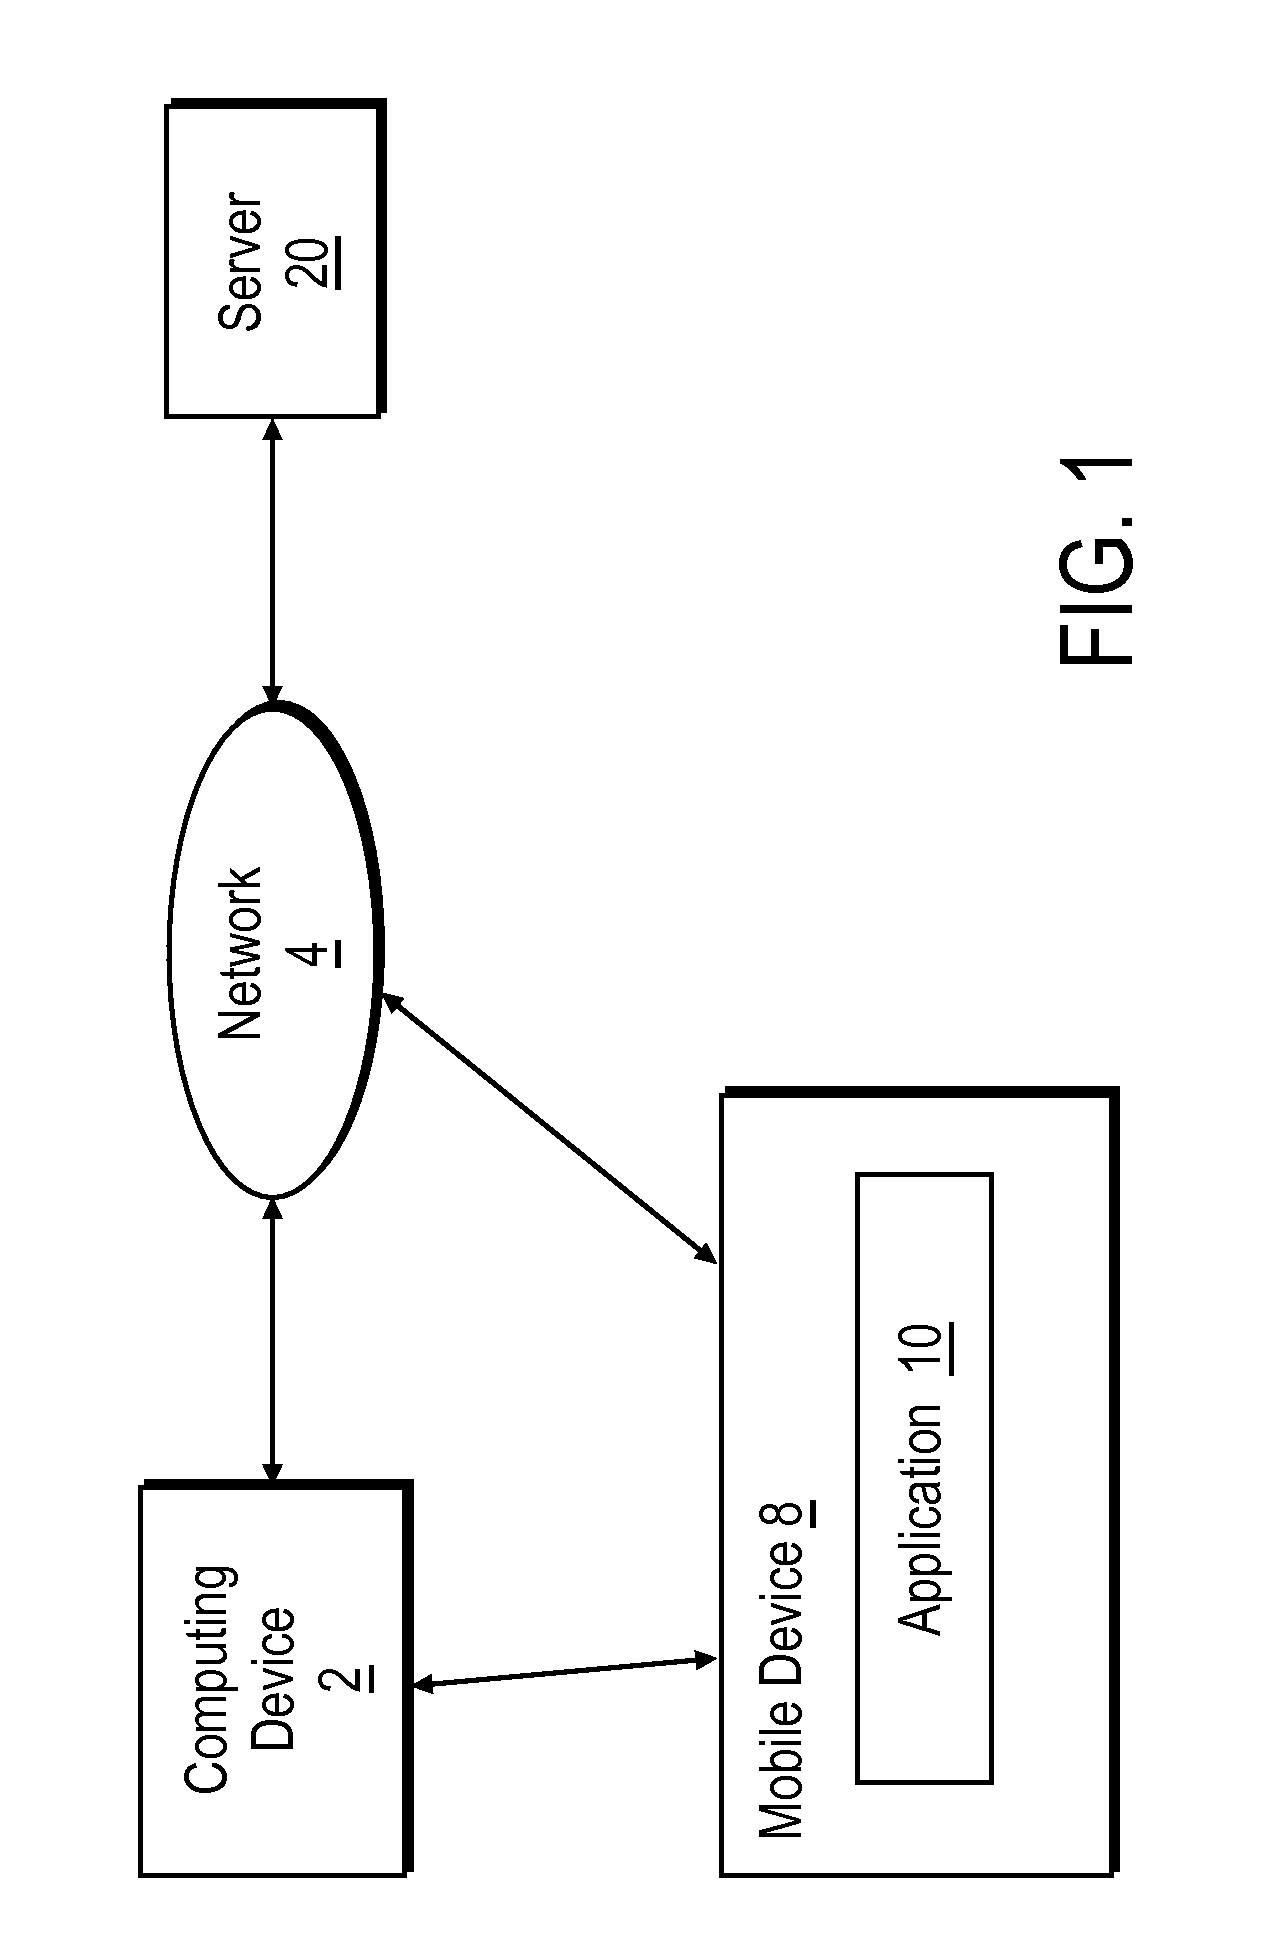 Method and system for producing emergency notifications